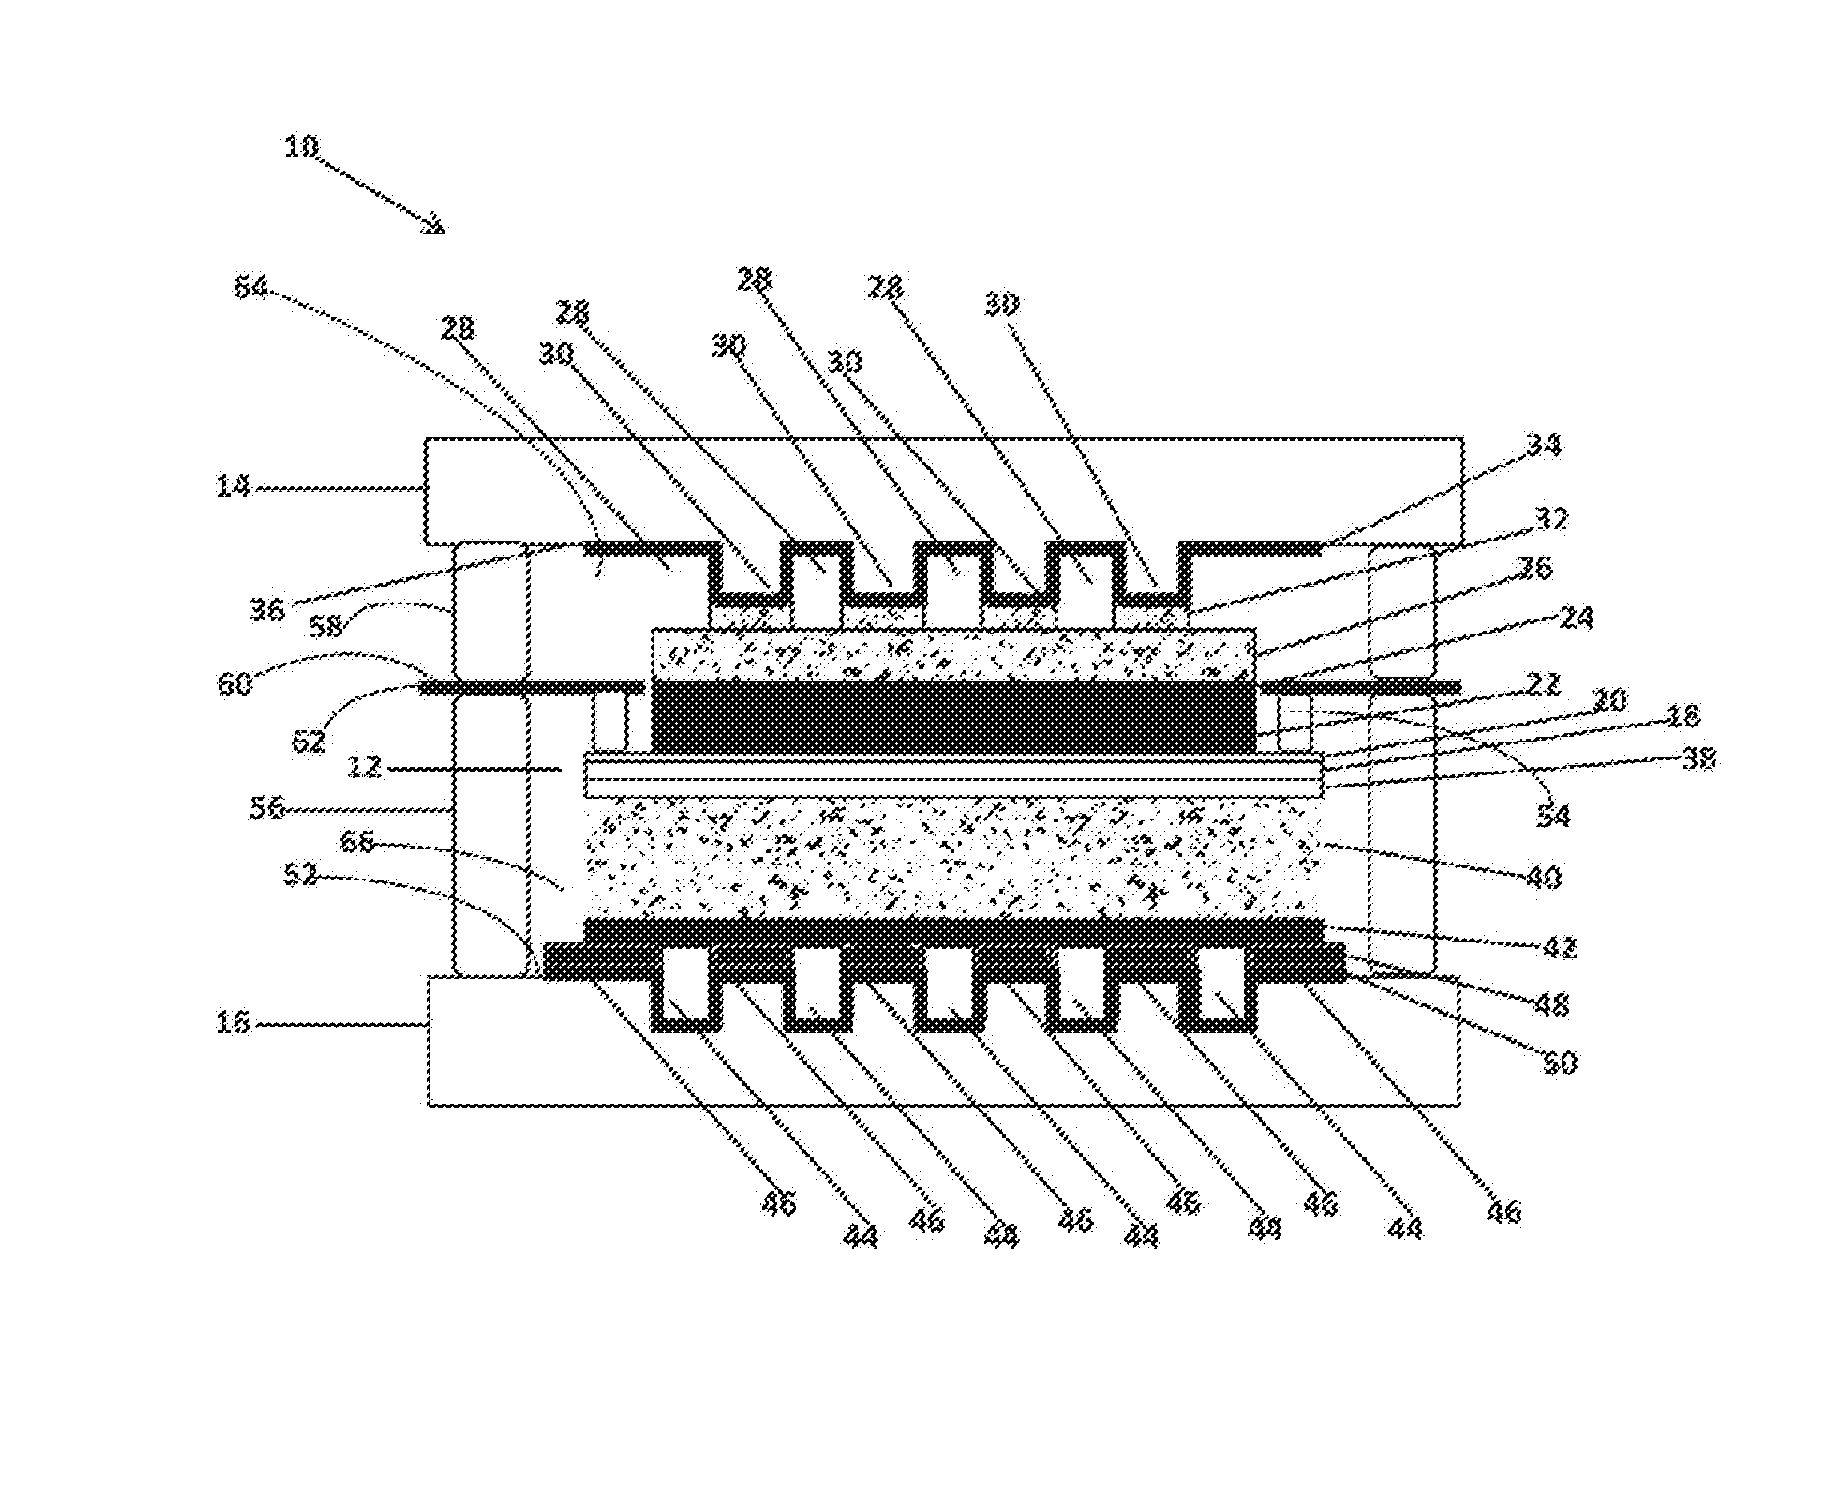 Electrochemical energy conversion devices and cells, and negative electrode-side materials for them